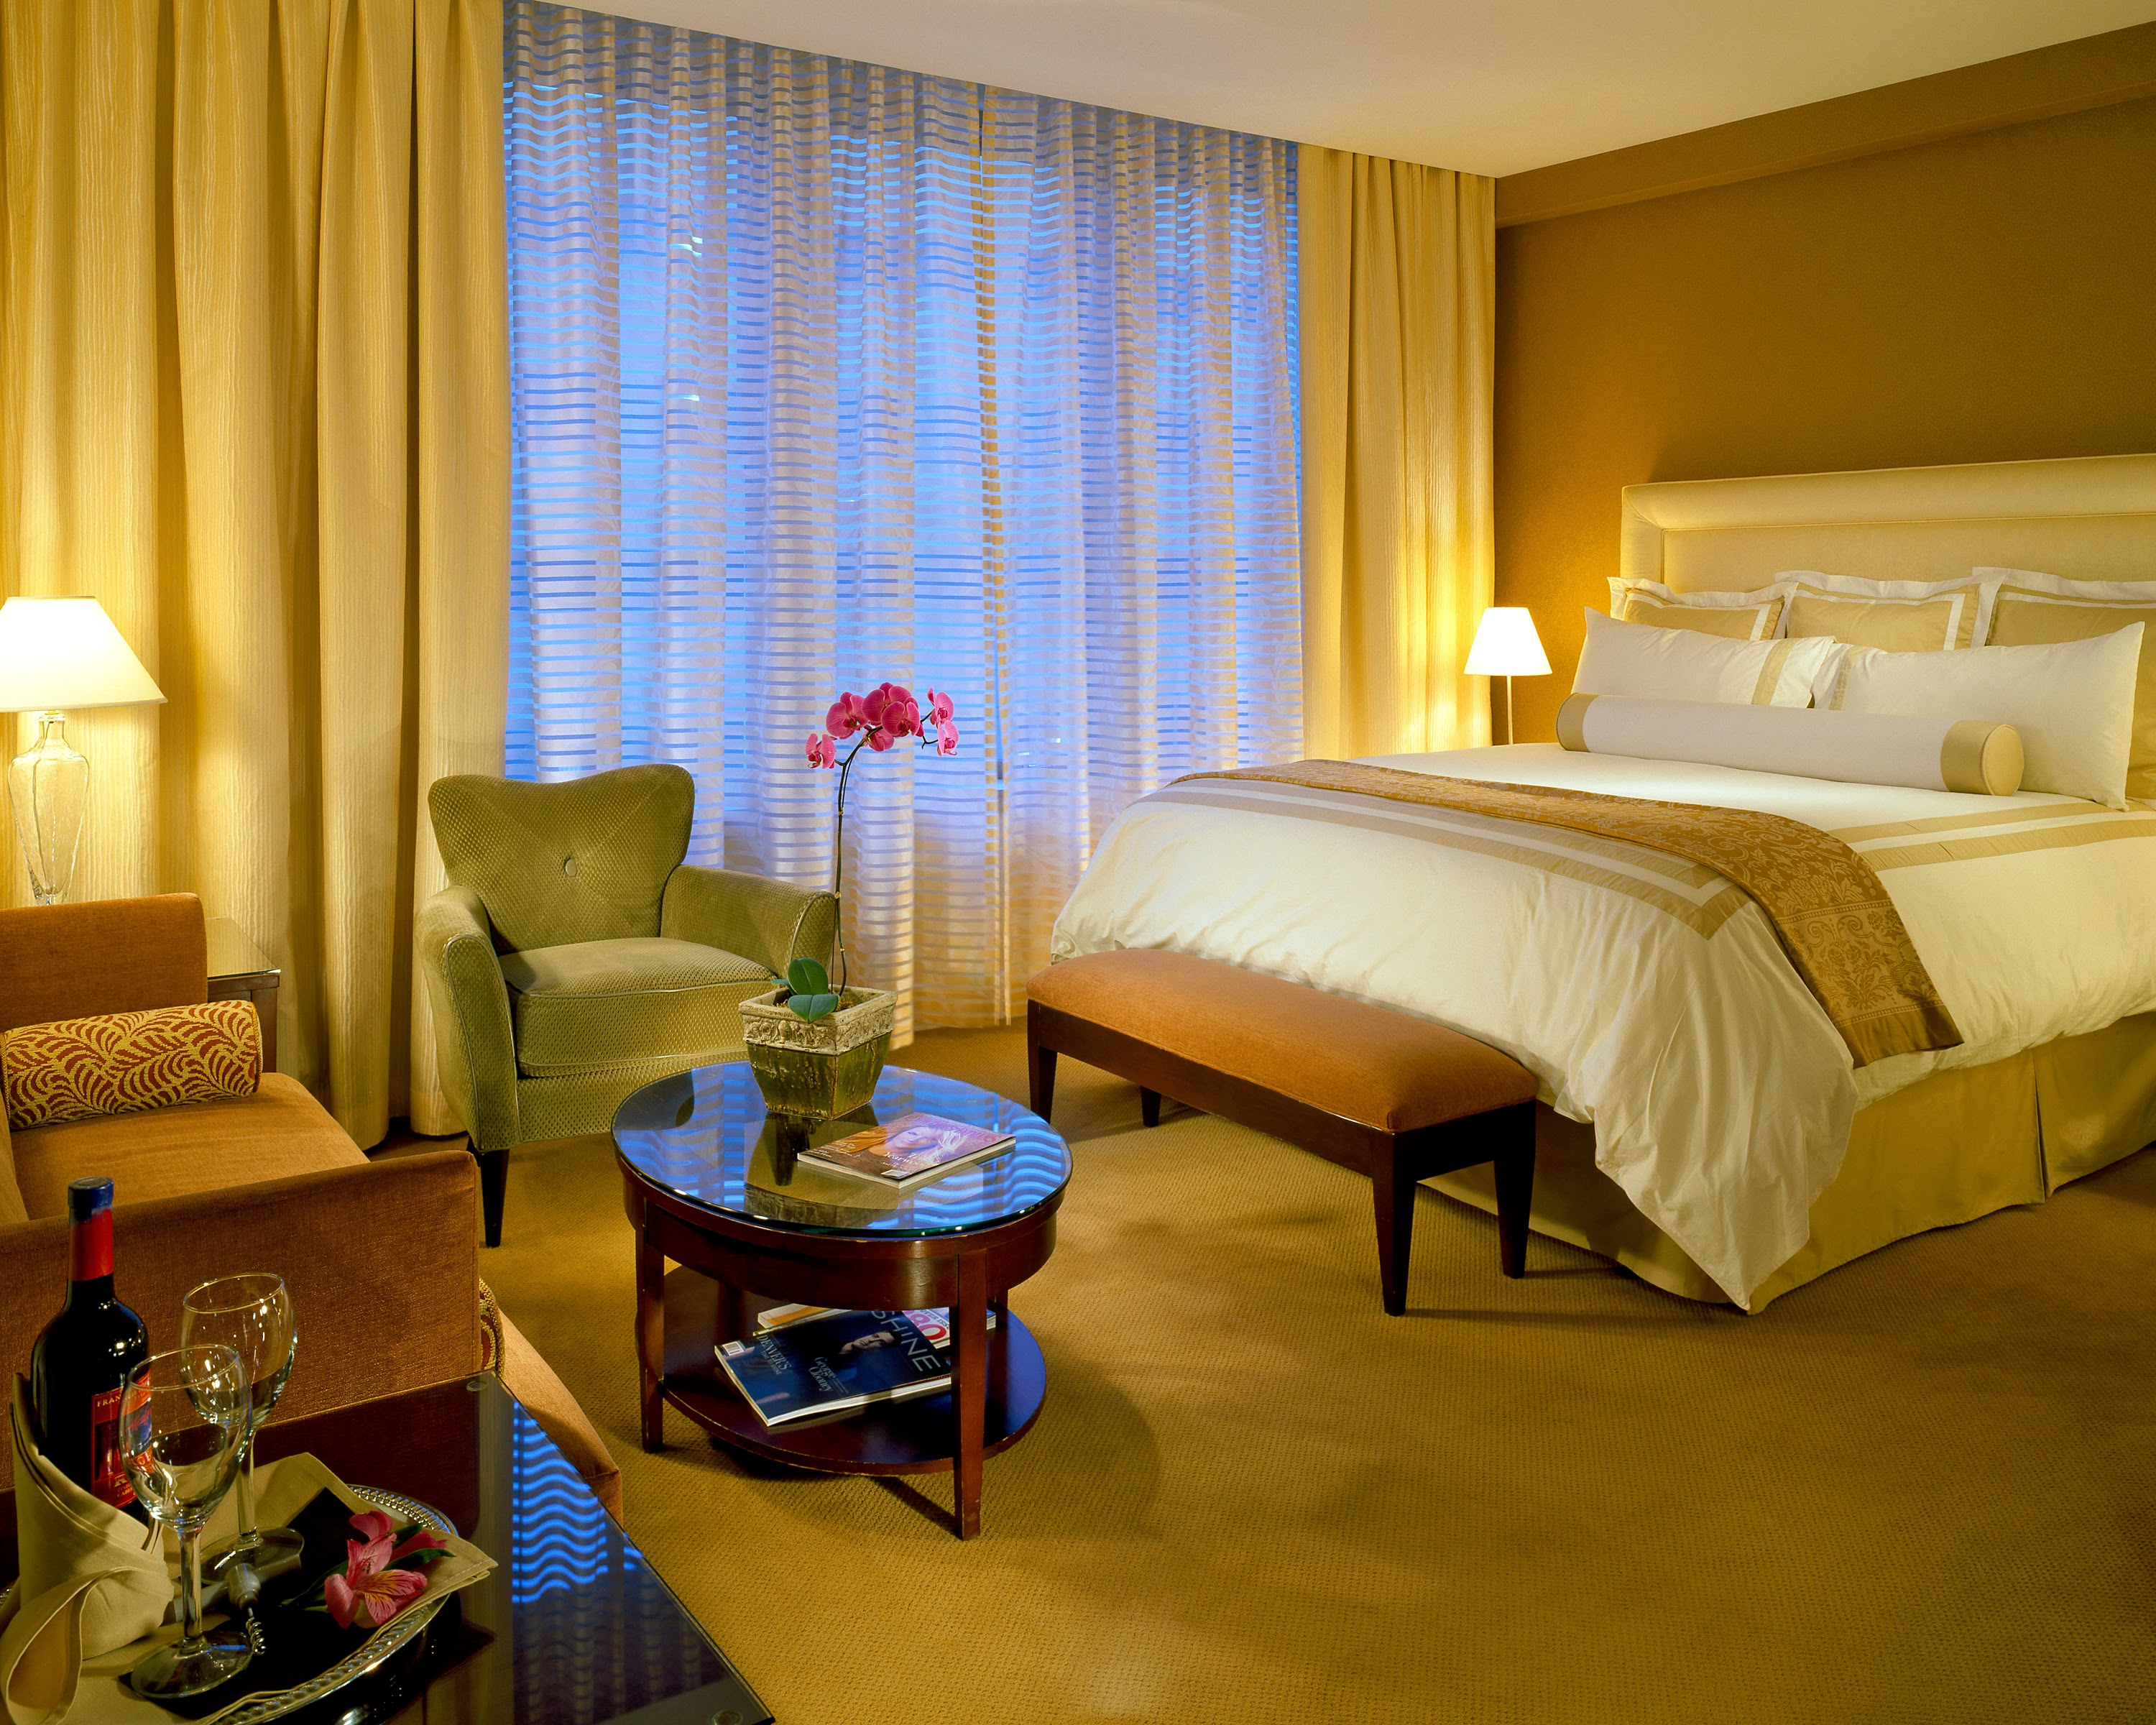 Hotel Teatro is an ideally-located luxury Denver Hotel.